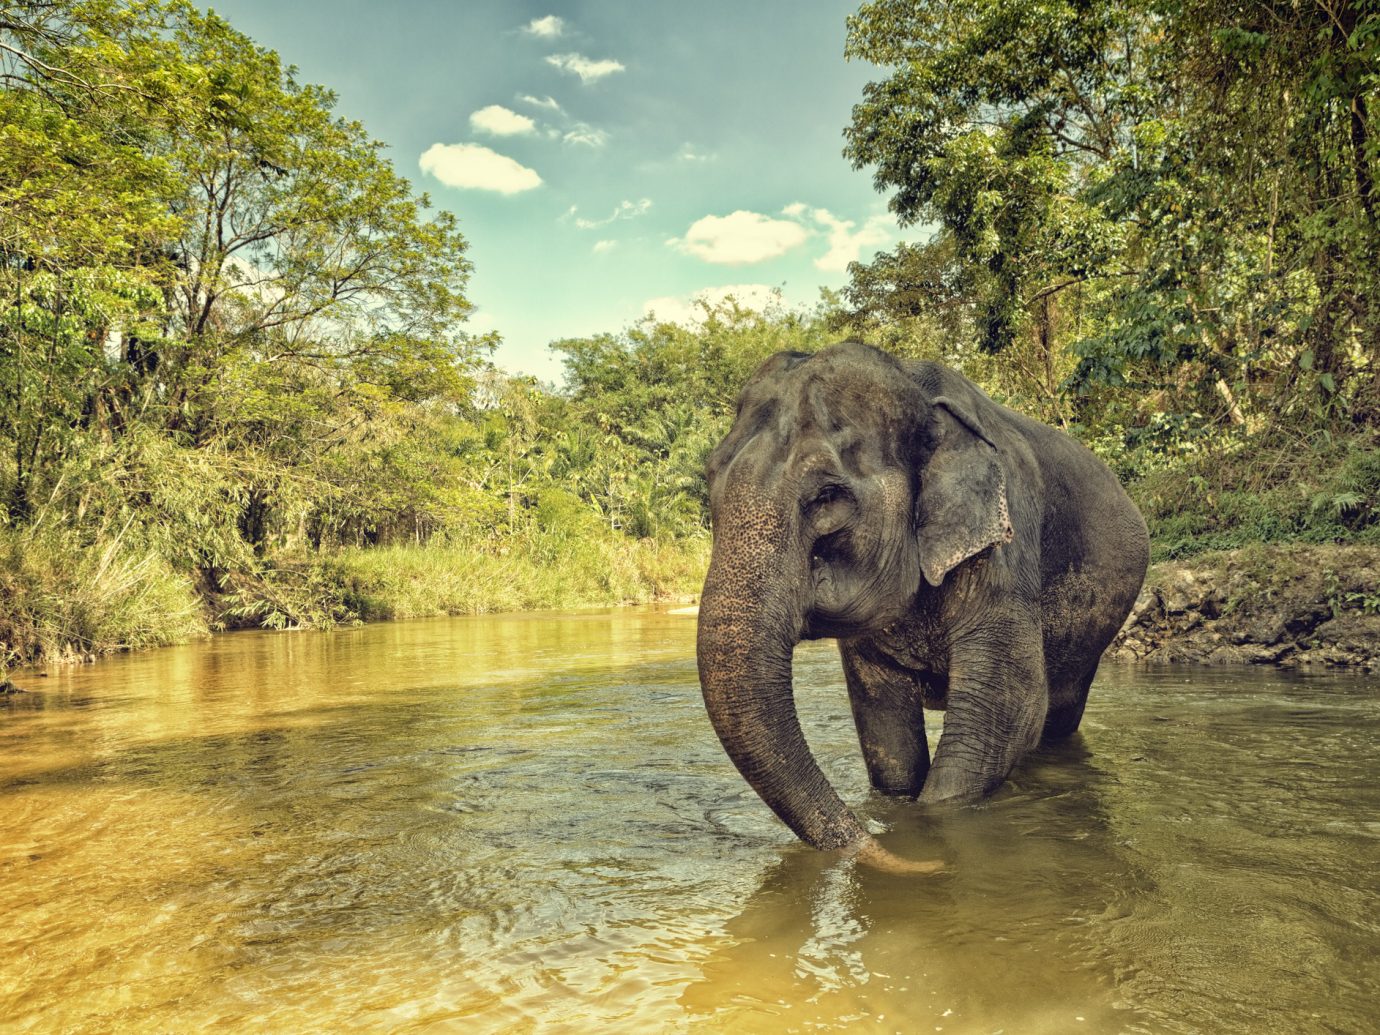 Elephant in jungle crossing a river.